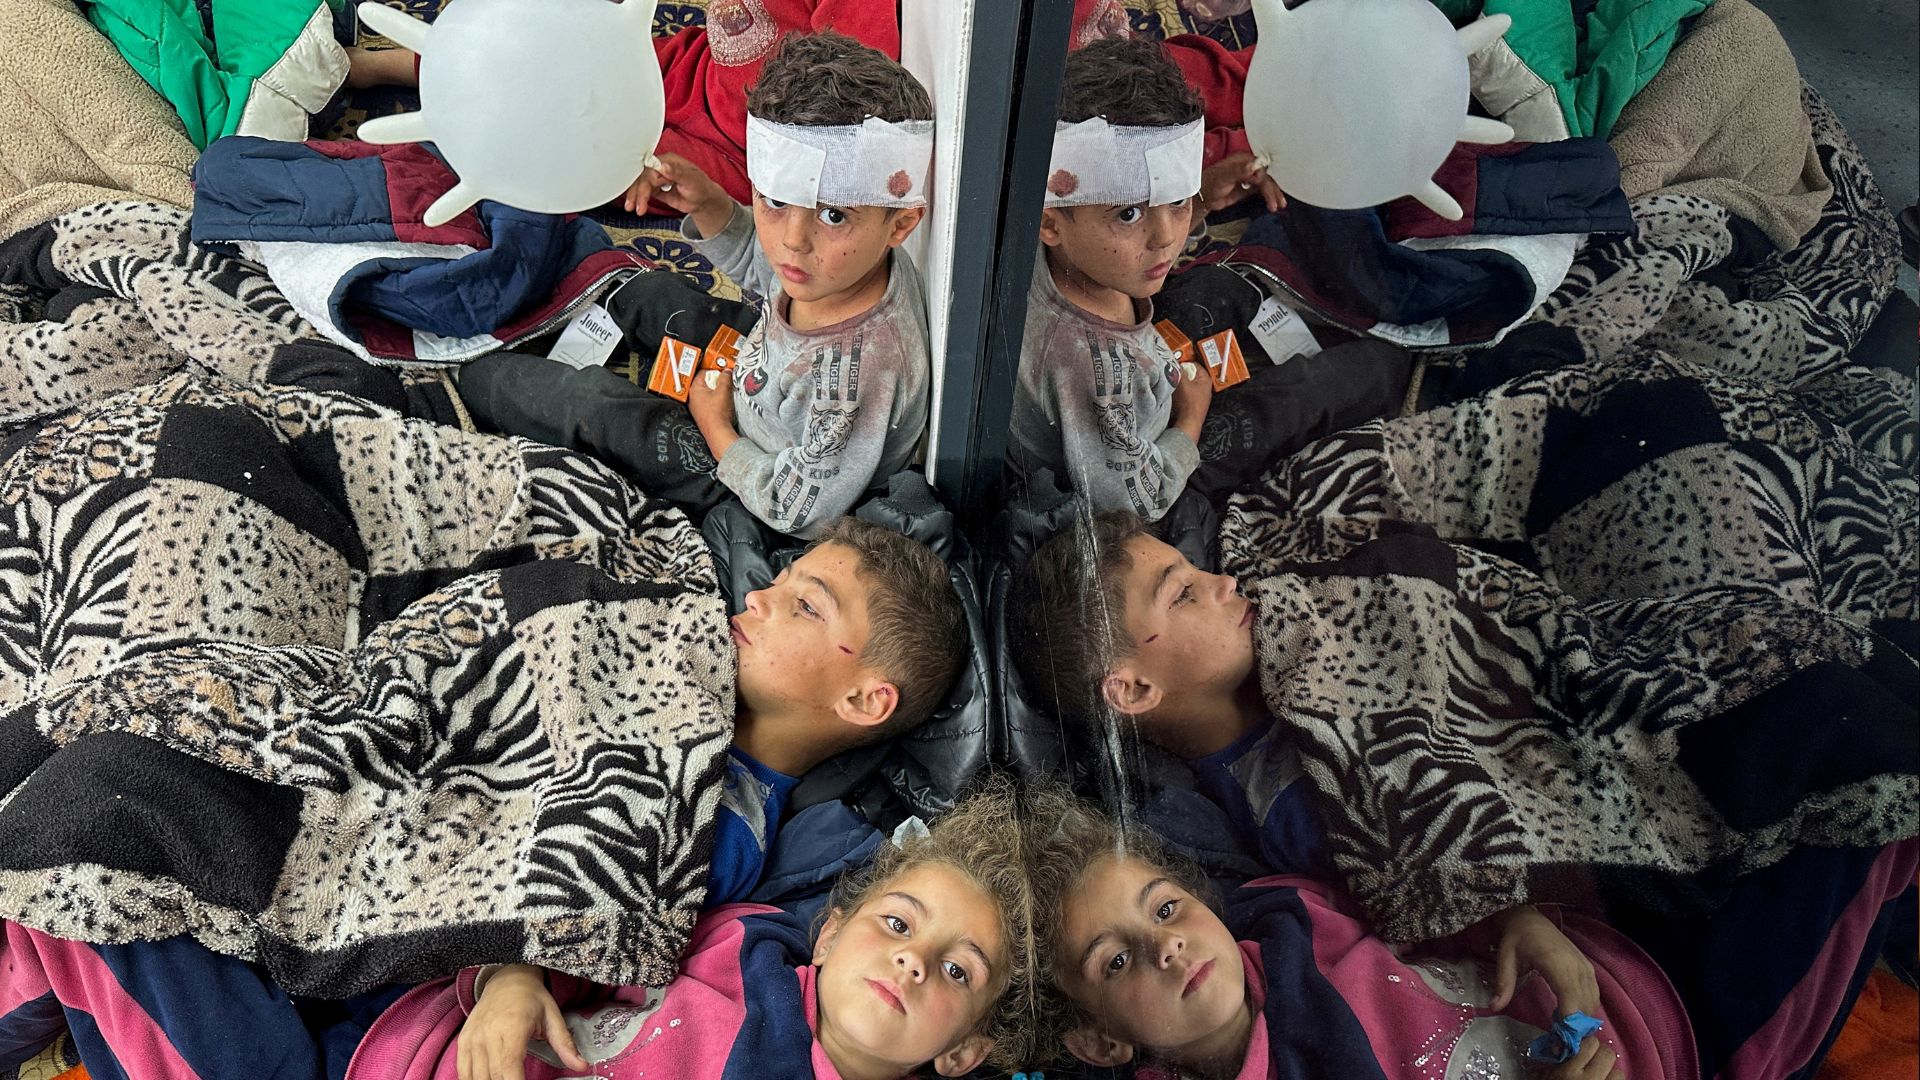 Palestinian children wounded in an Israeli strike rest as they receive treatment at a hospital. /Mohammed Salem/Reuters